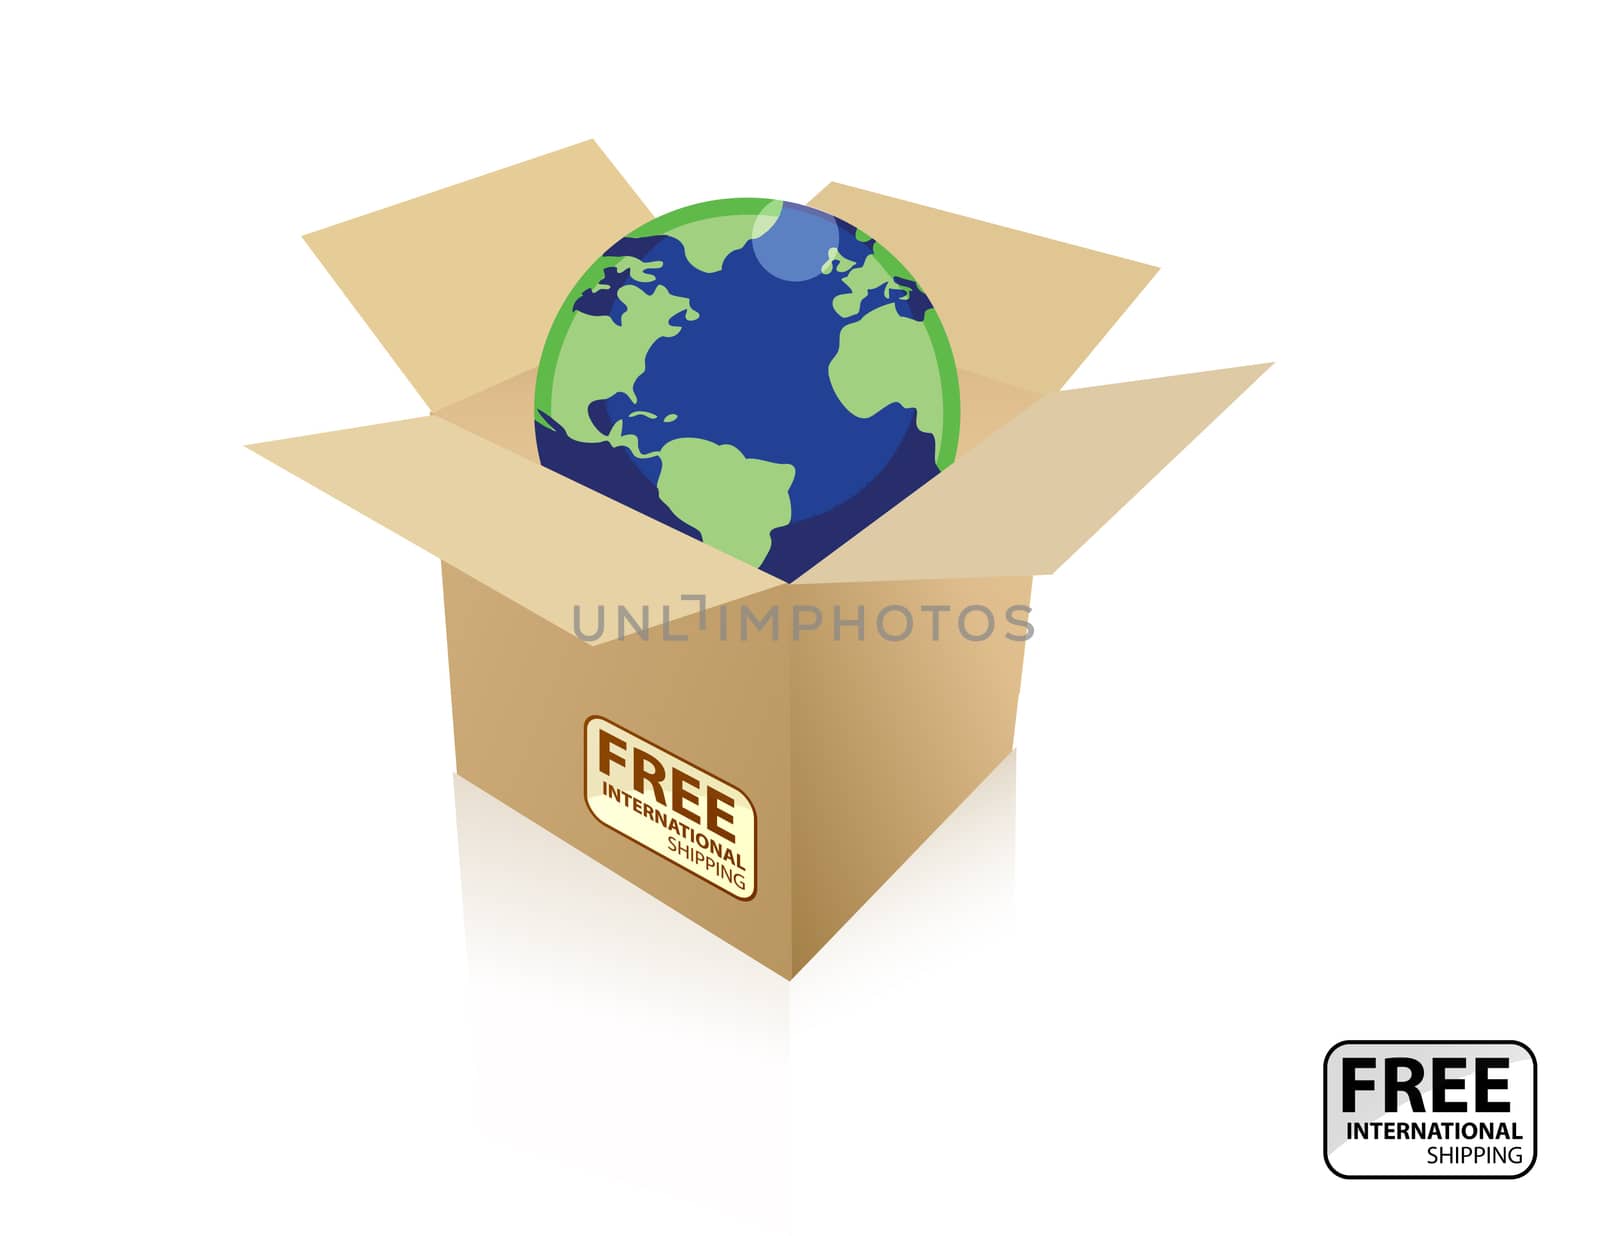 A International free shipping icon. The icon has a cardboard box with a globe inside. vector file also available. / Shipping world box / Shipping world box